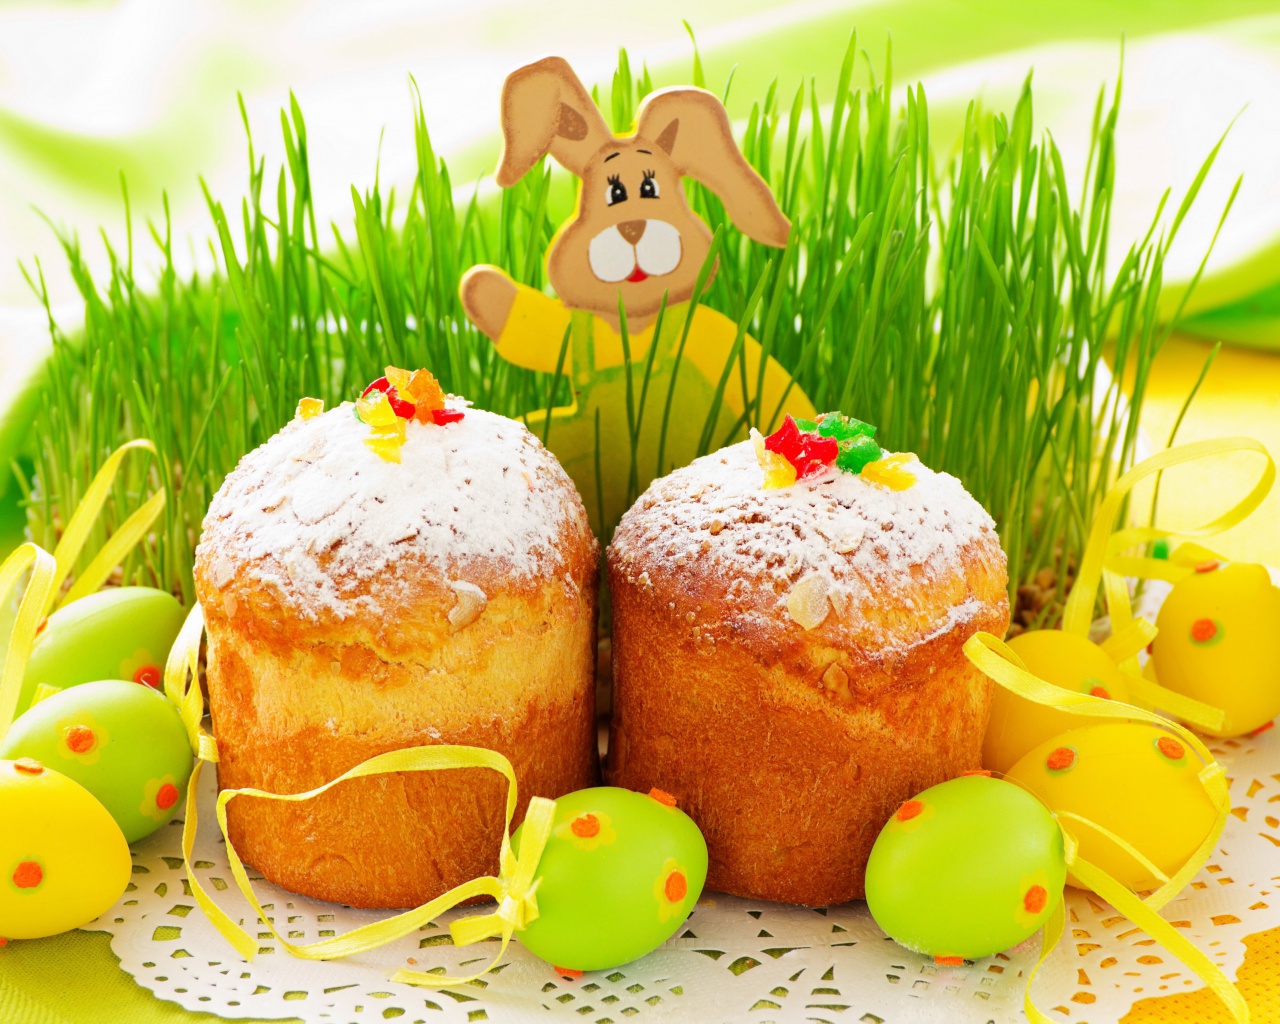 Das Easter Wish and Eggs Wallpaper 1280x1024